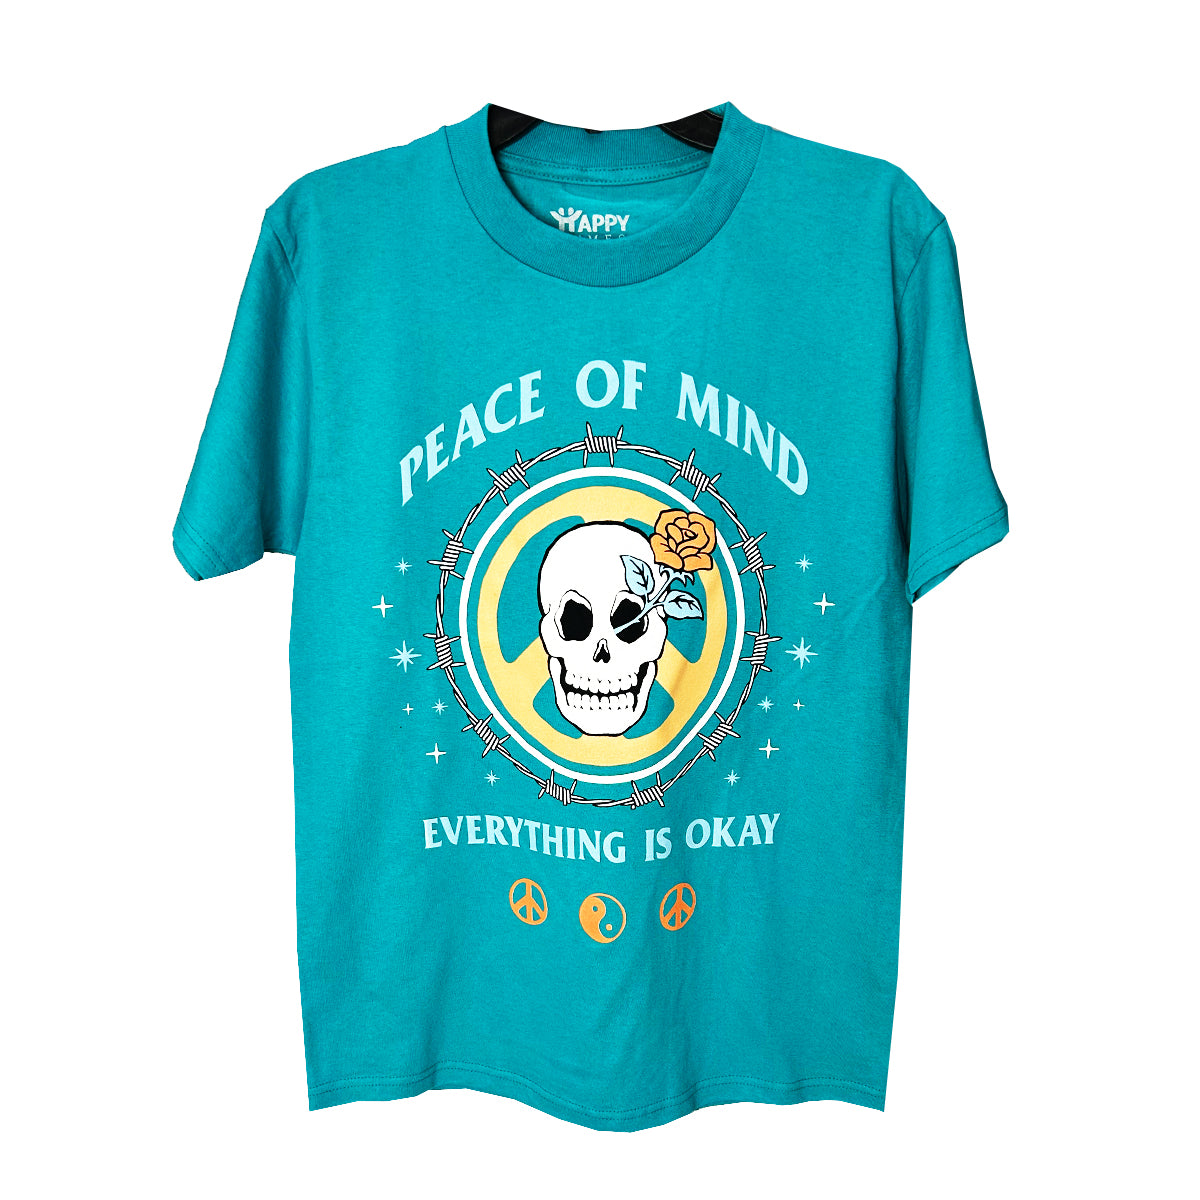 Peace of Mind - Pack of 6 Units  1S, 2M, 2L, 1XL